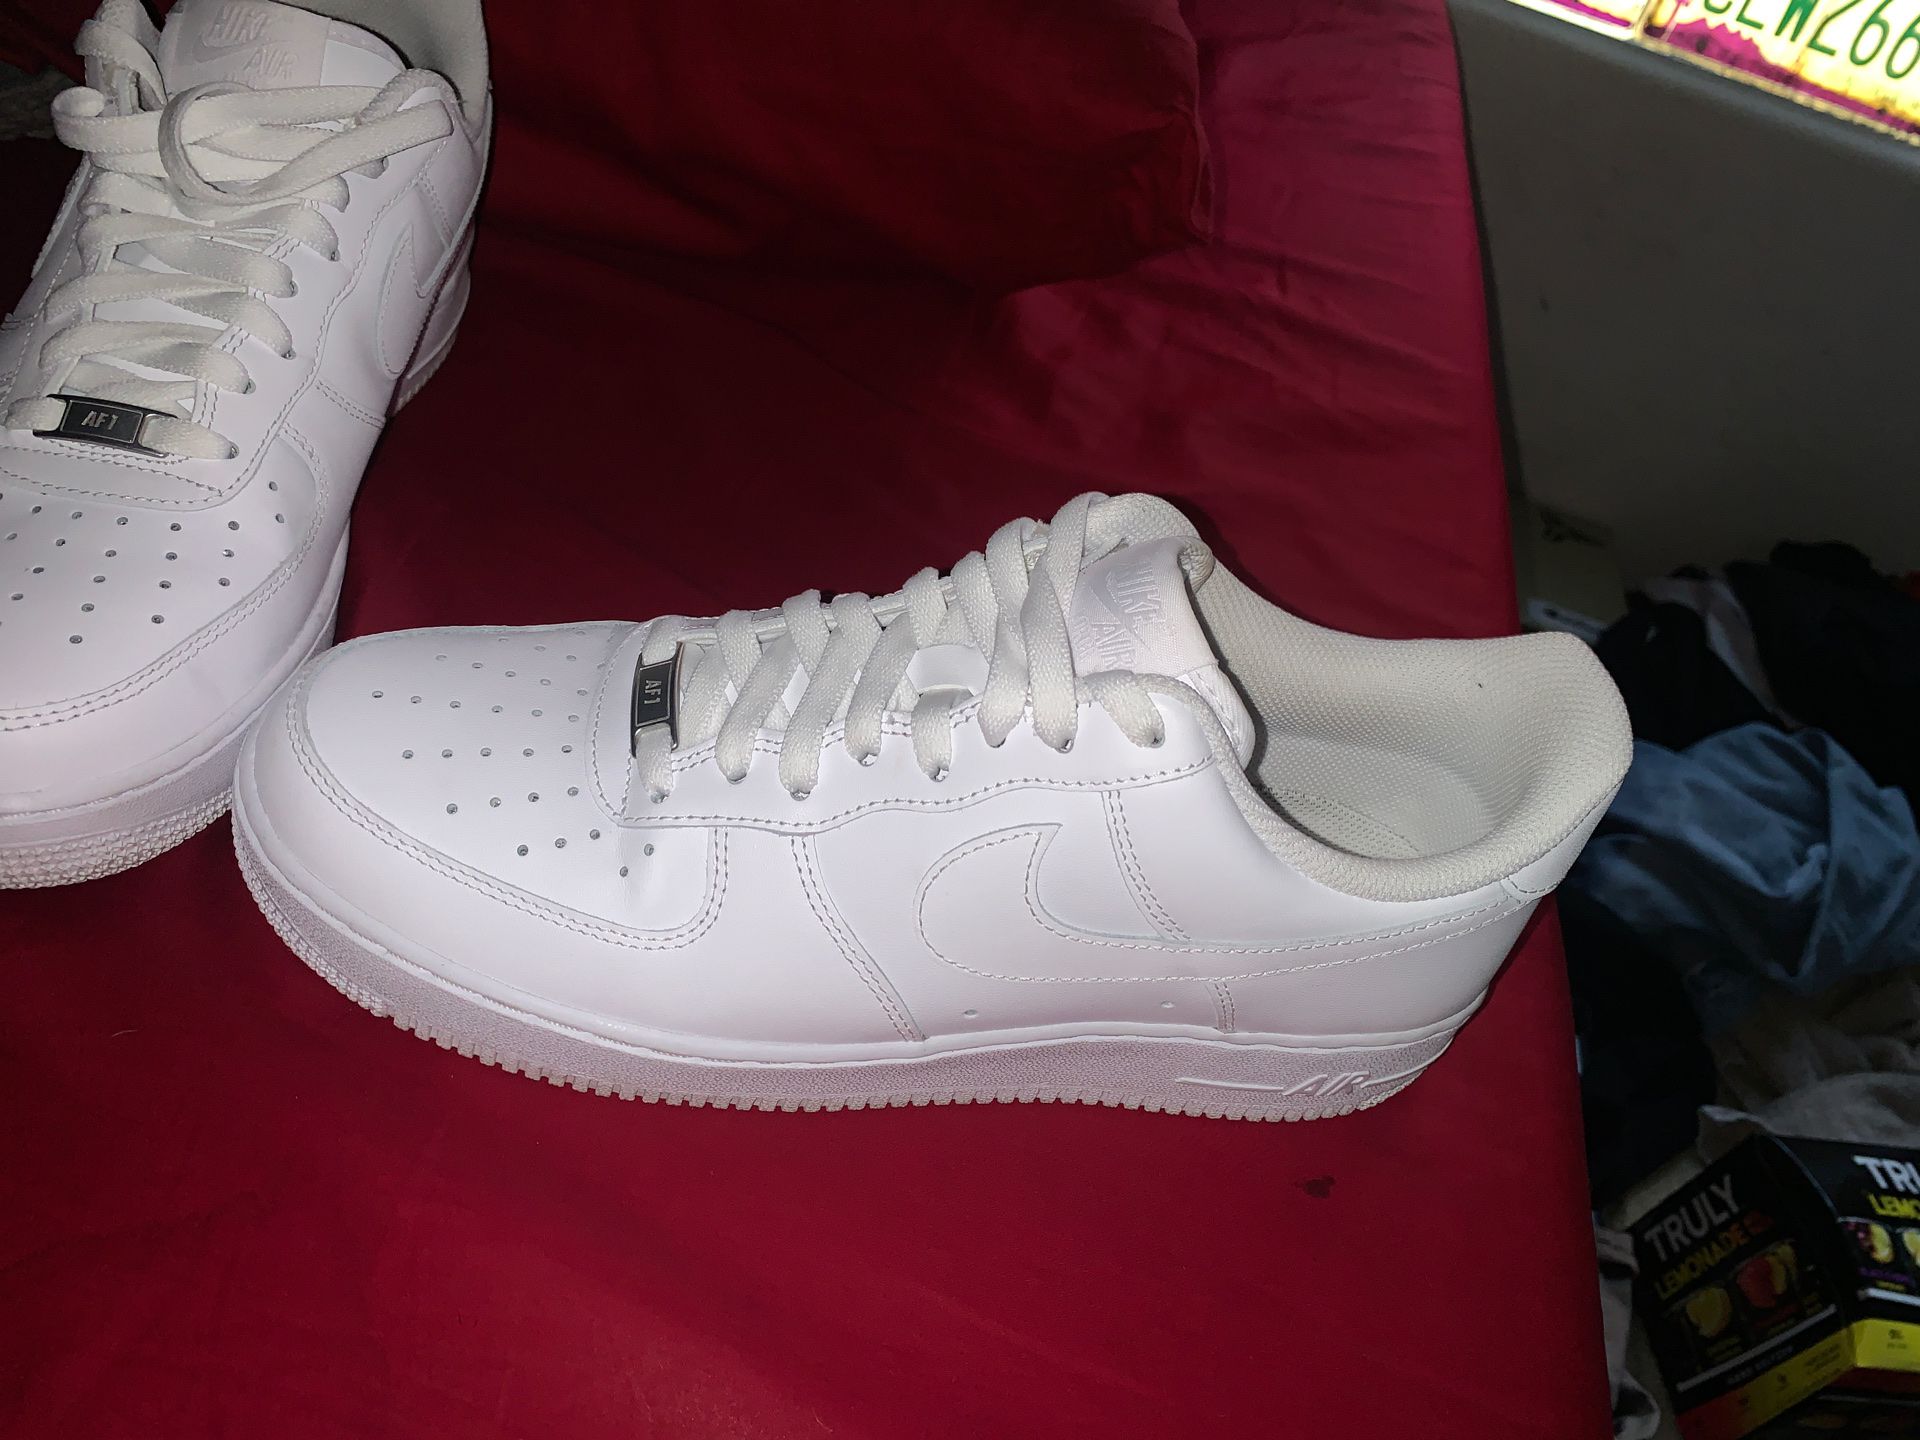 Nike Airforce 1’s - Size 10